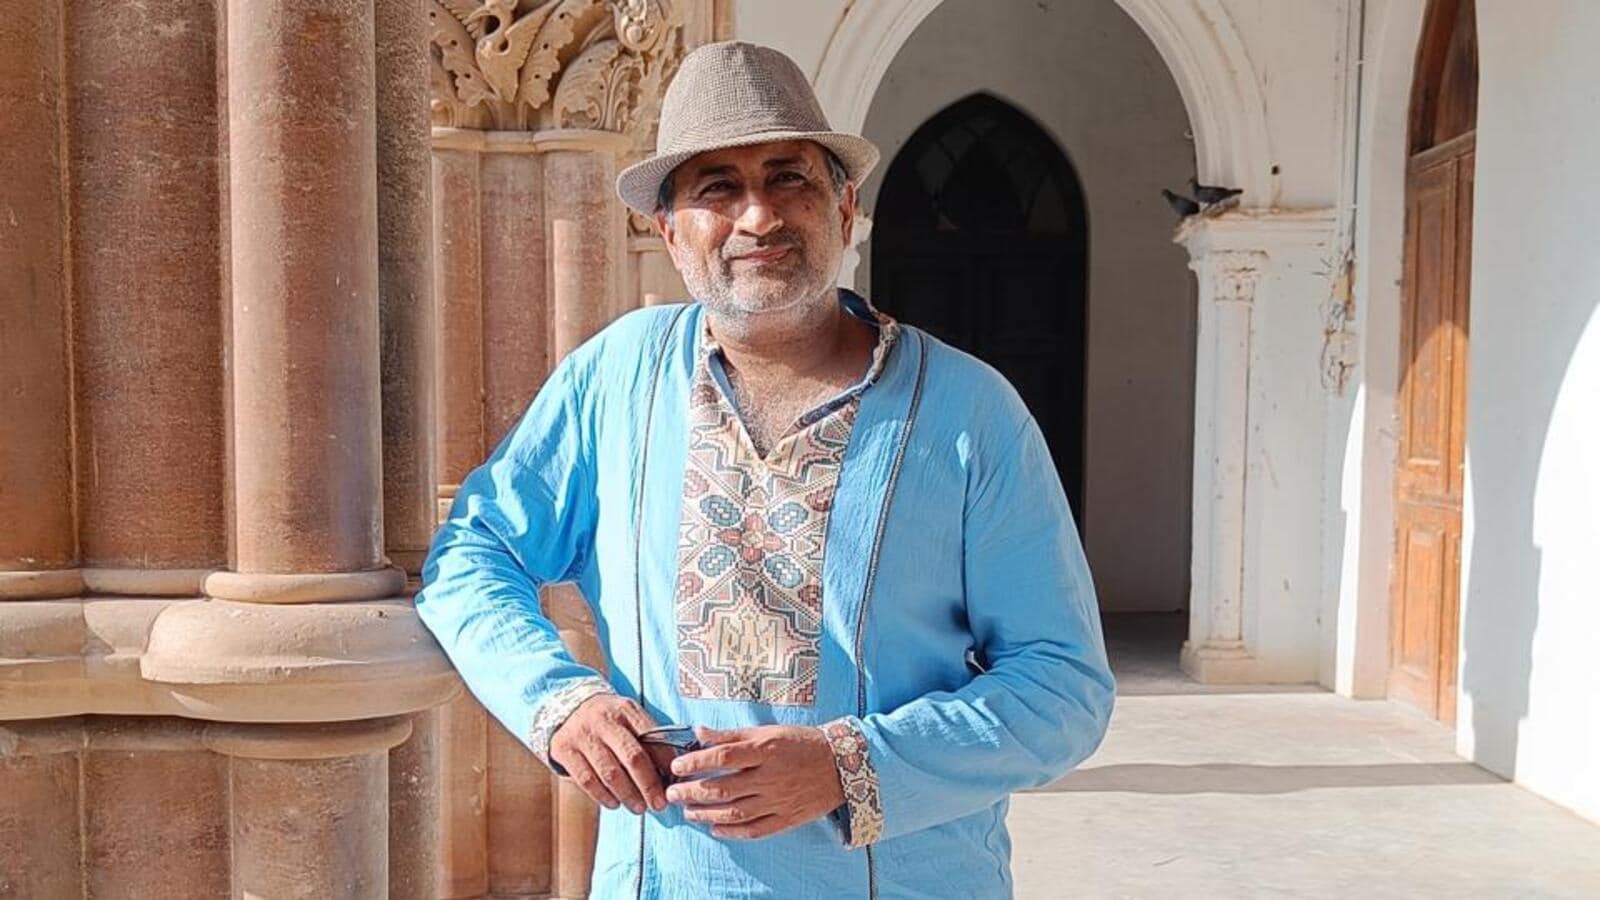 Screenwriter, Mohinder Pratap Singh: “I’d like to see more justice in the world”